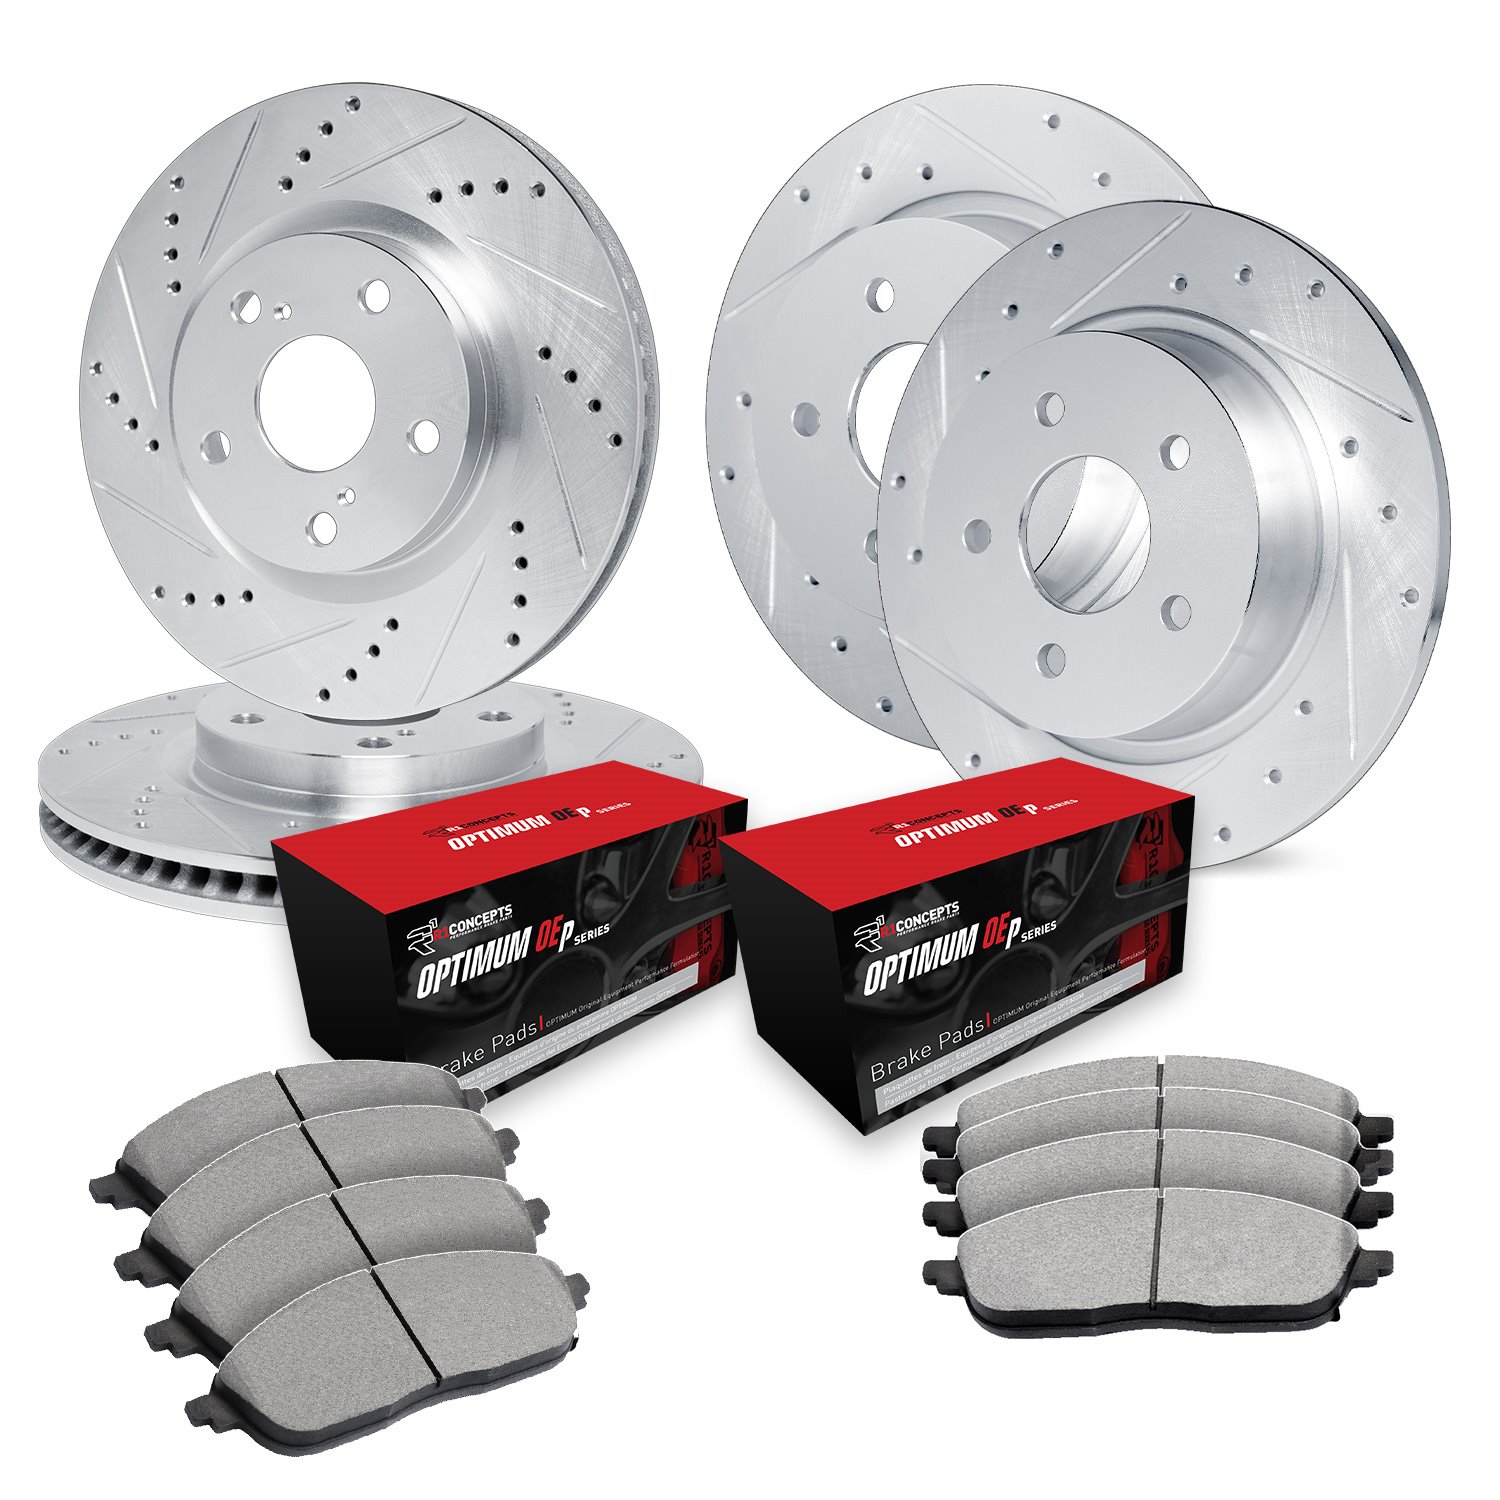 E-Line Drilled & Slotted Silver Brake Rotor Set w/Optimum OE Pads, 1993-1993 Mopar, Position: Front & Rear